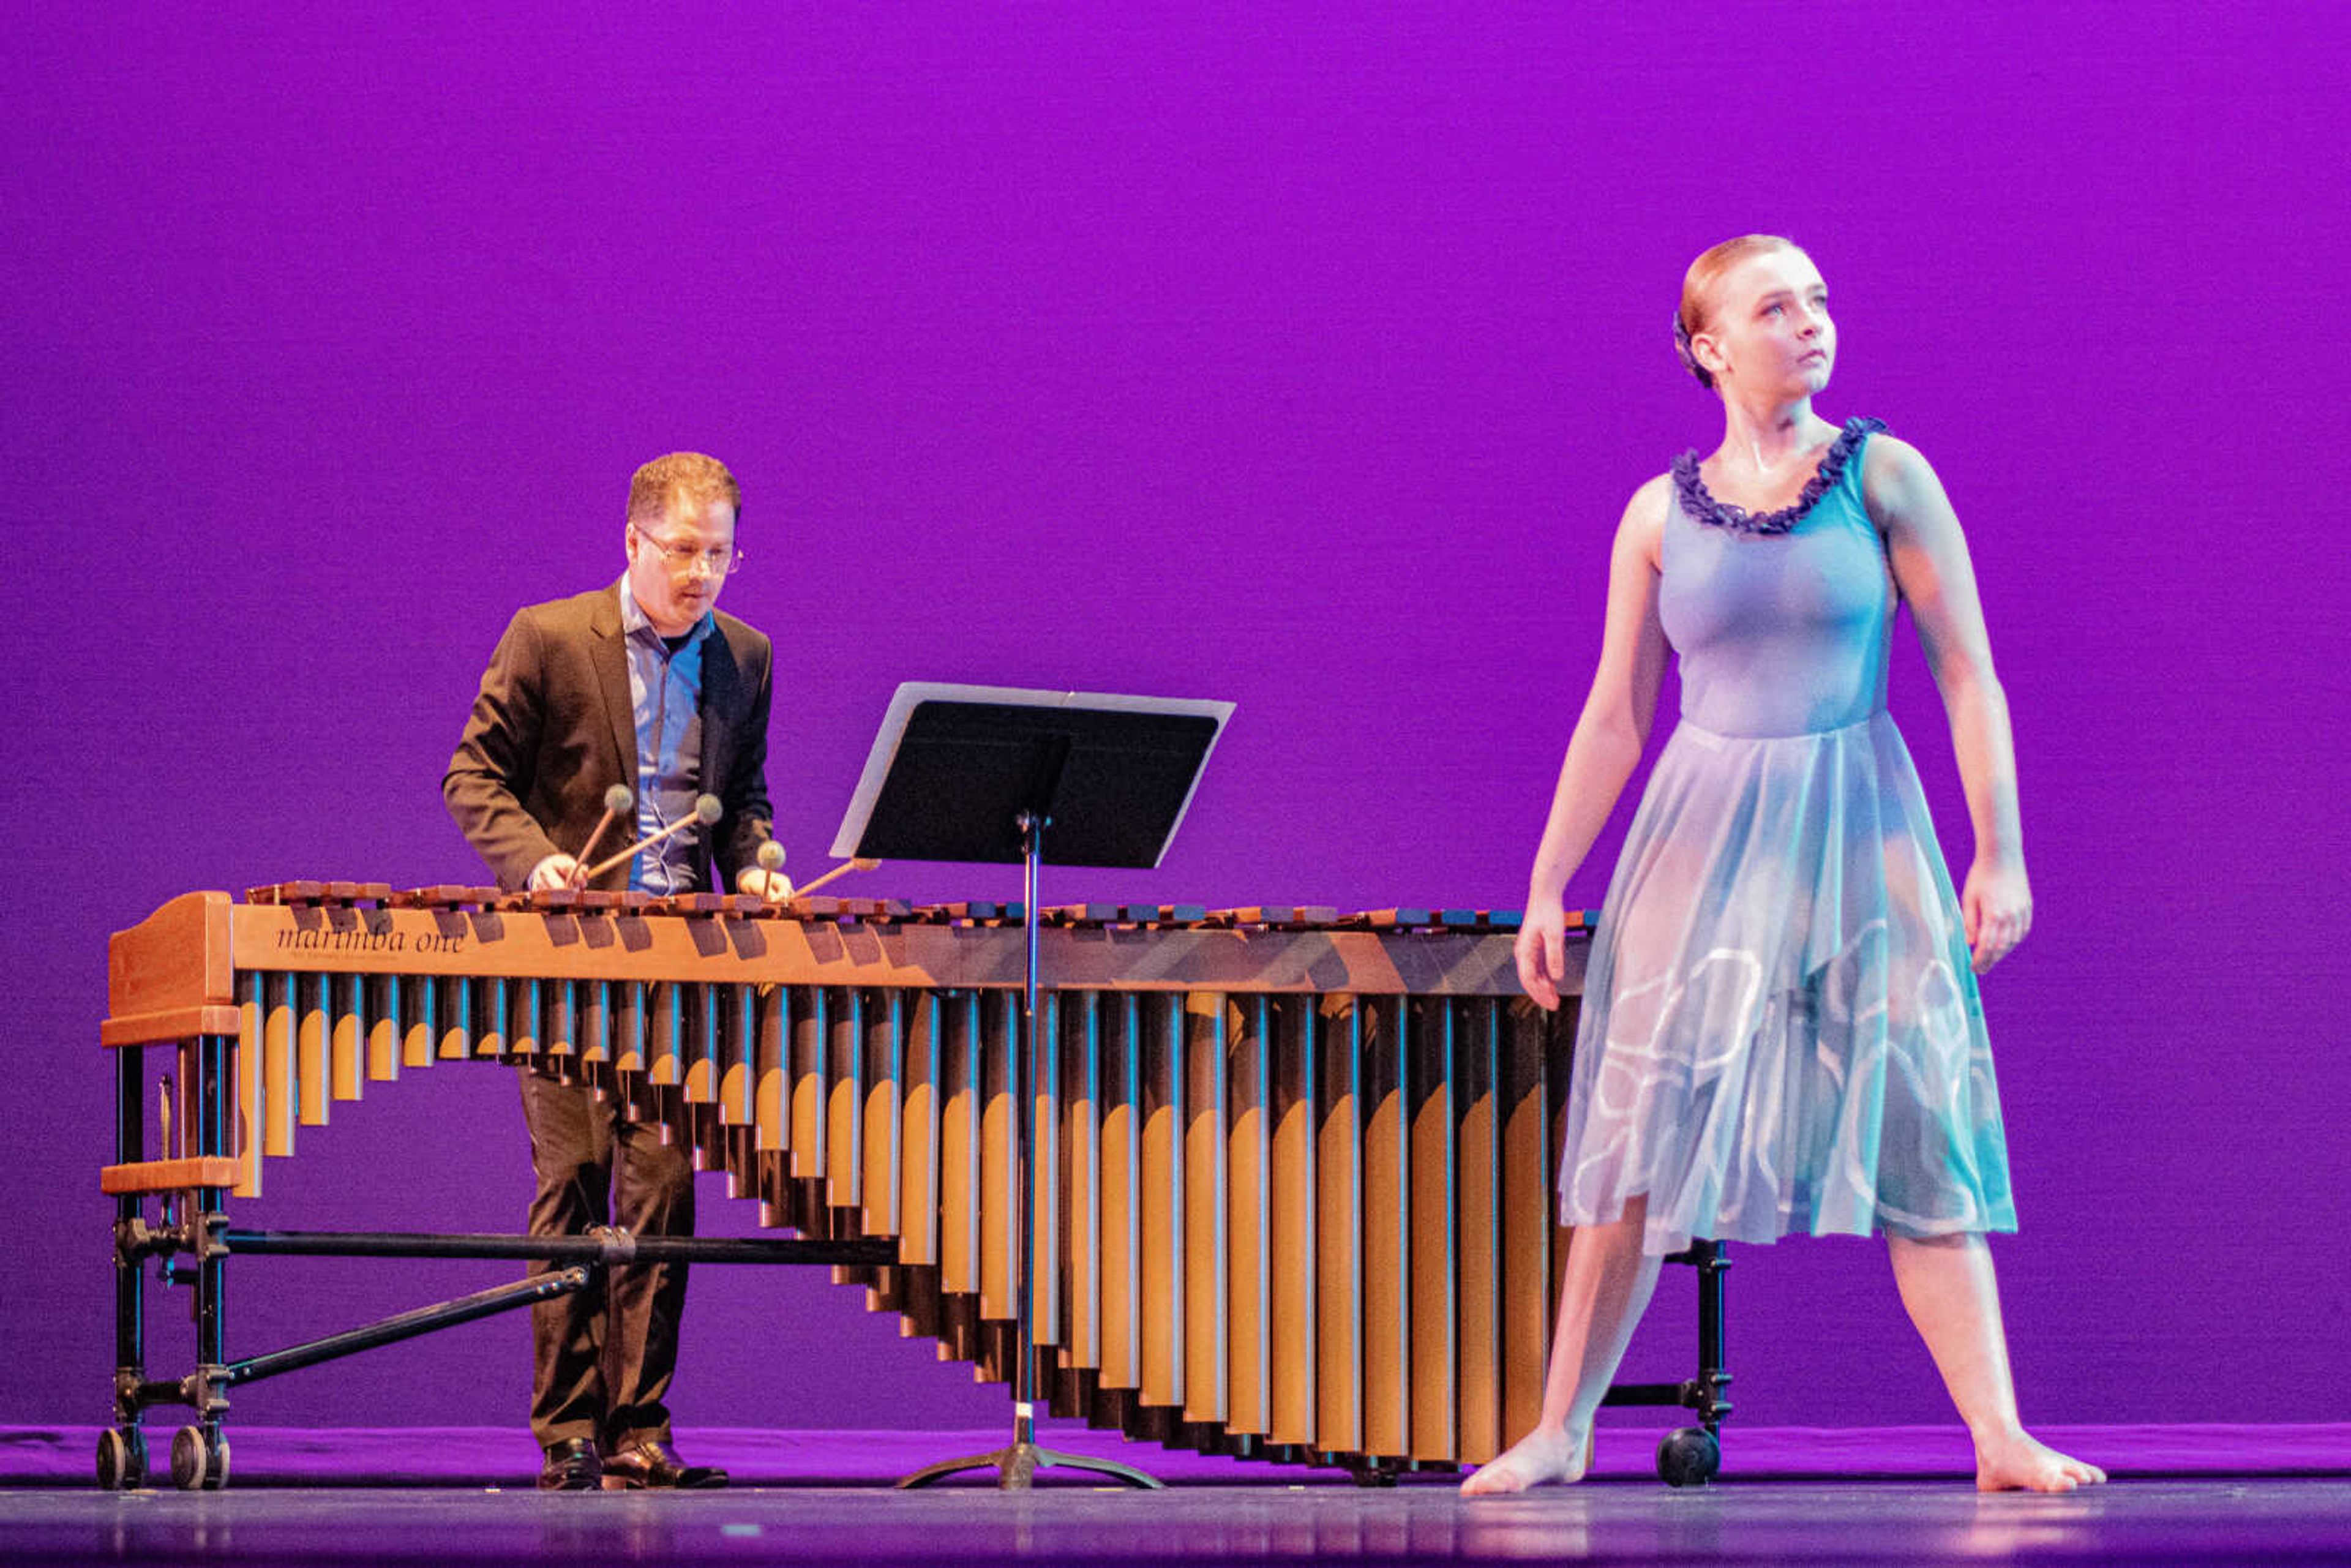 Dancer Emma Knowlton waits for a cue from musician Christopher Wilson to start her next sequence of movements at the 2019 Fall for Dance performance. The 2022 Spring into Dance performance is collaborating with SEMO's percussion ensemble for the first time in several years.